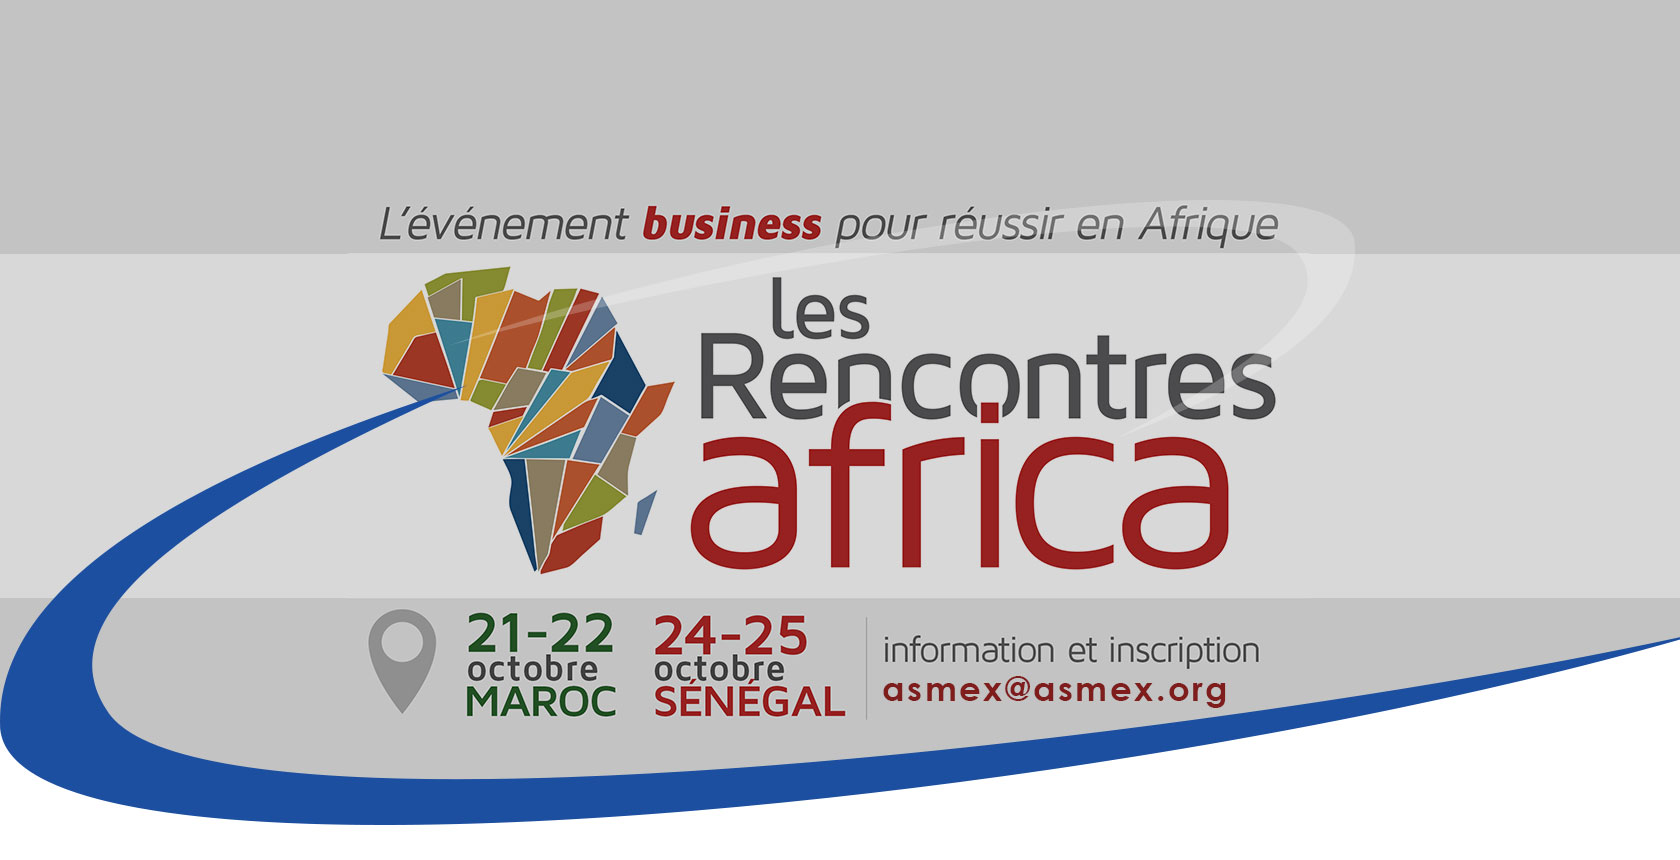 France-Africa: Morocco & Senegal to host 4th edition of “Rencontres Africa”